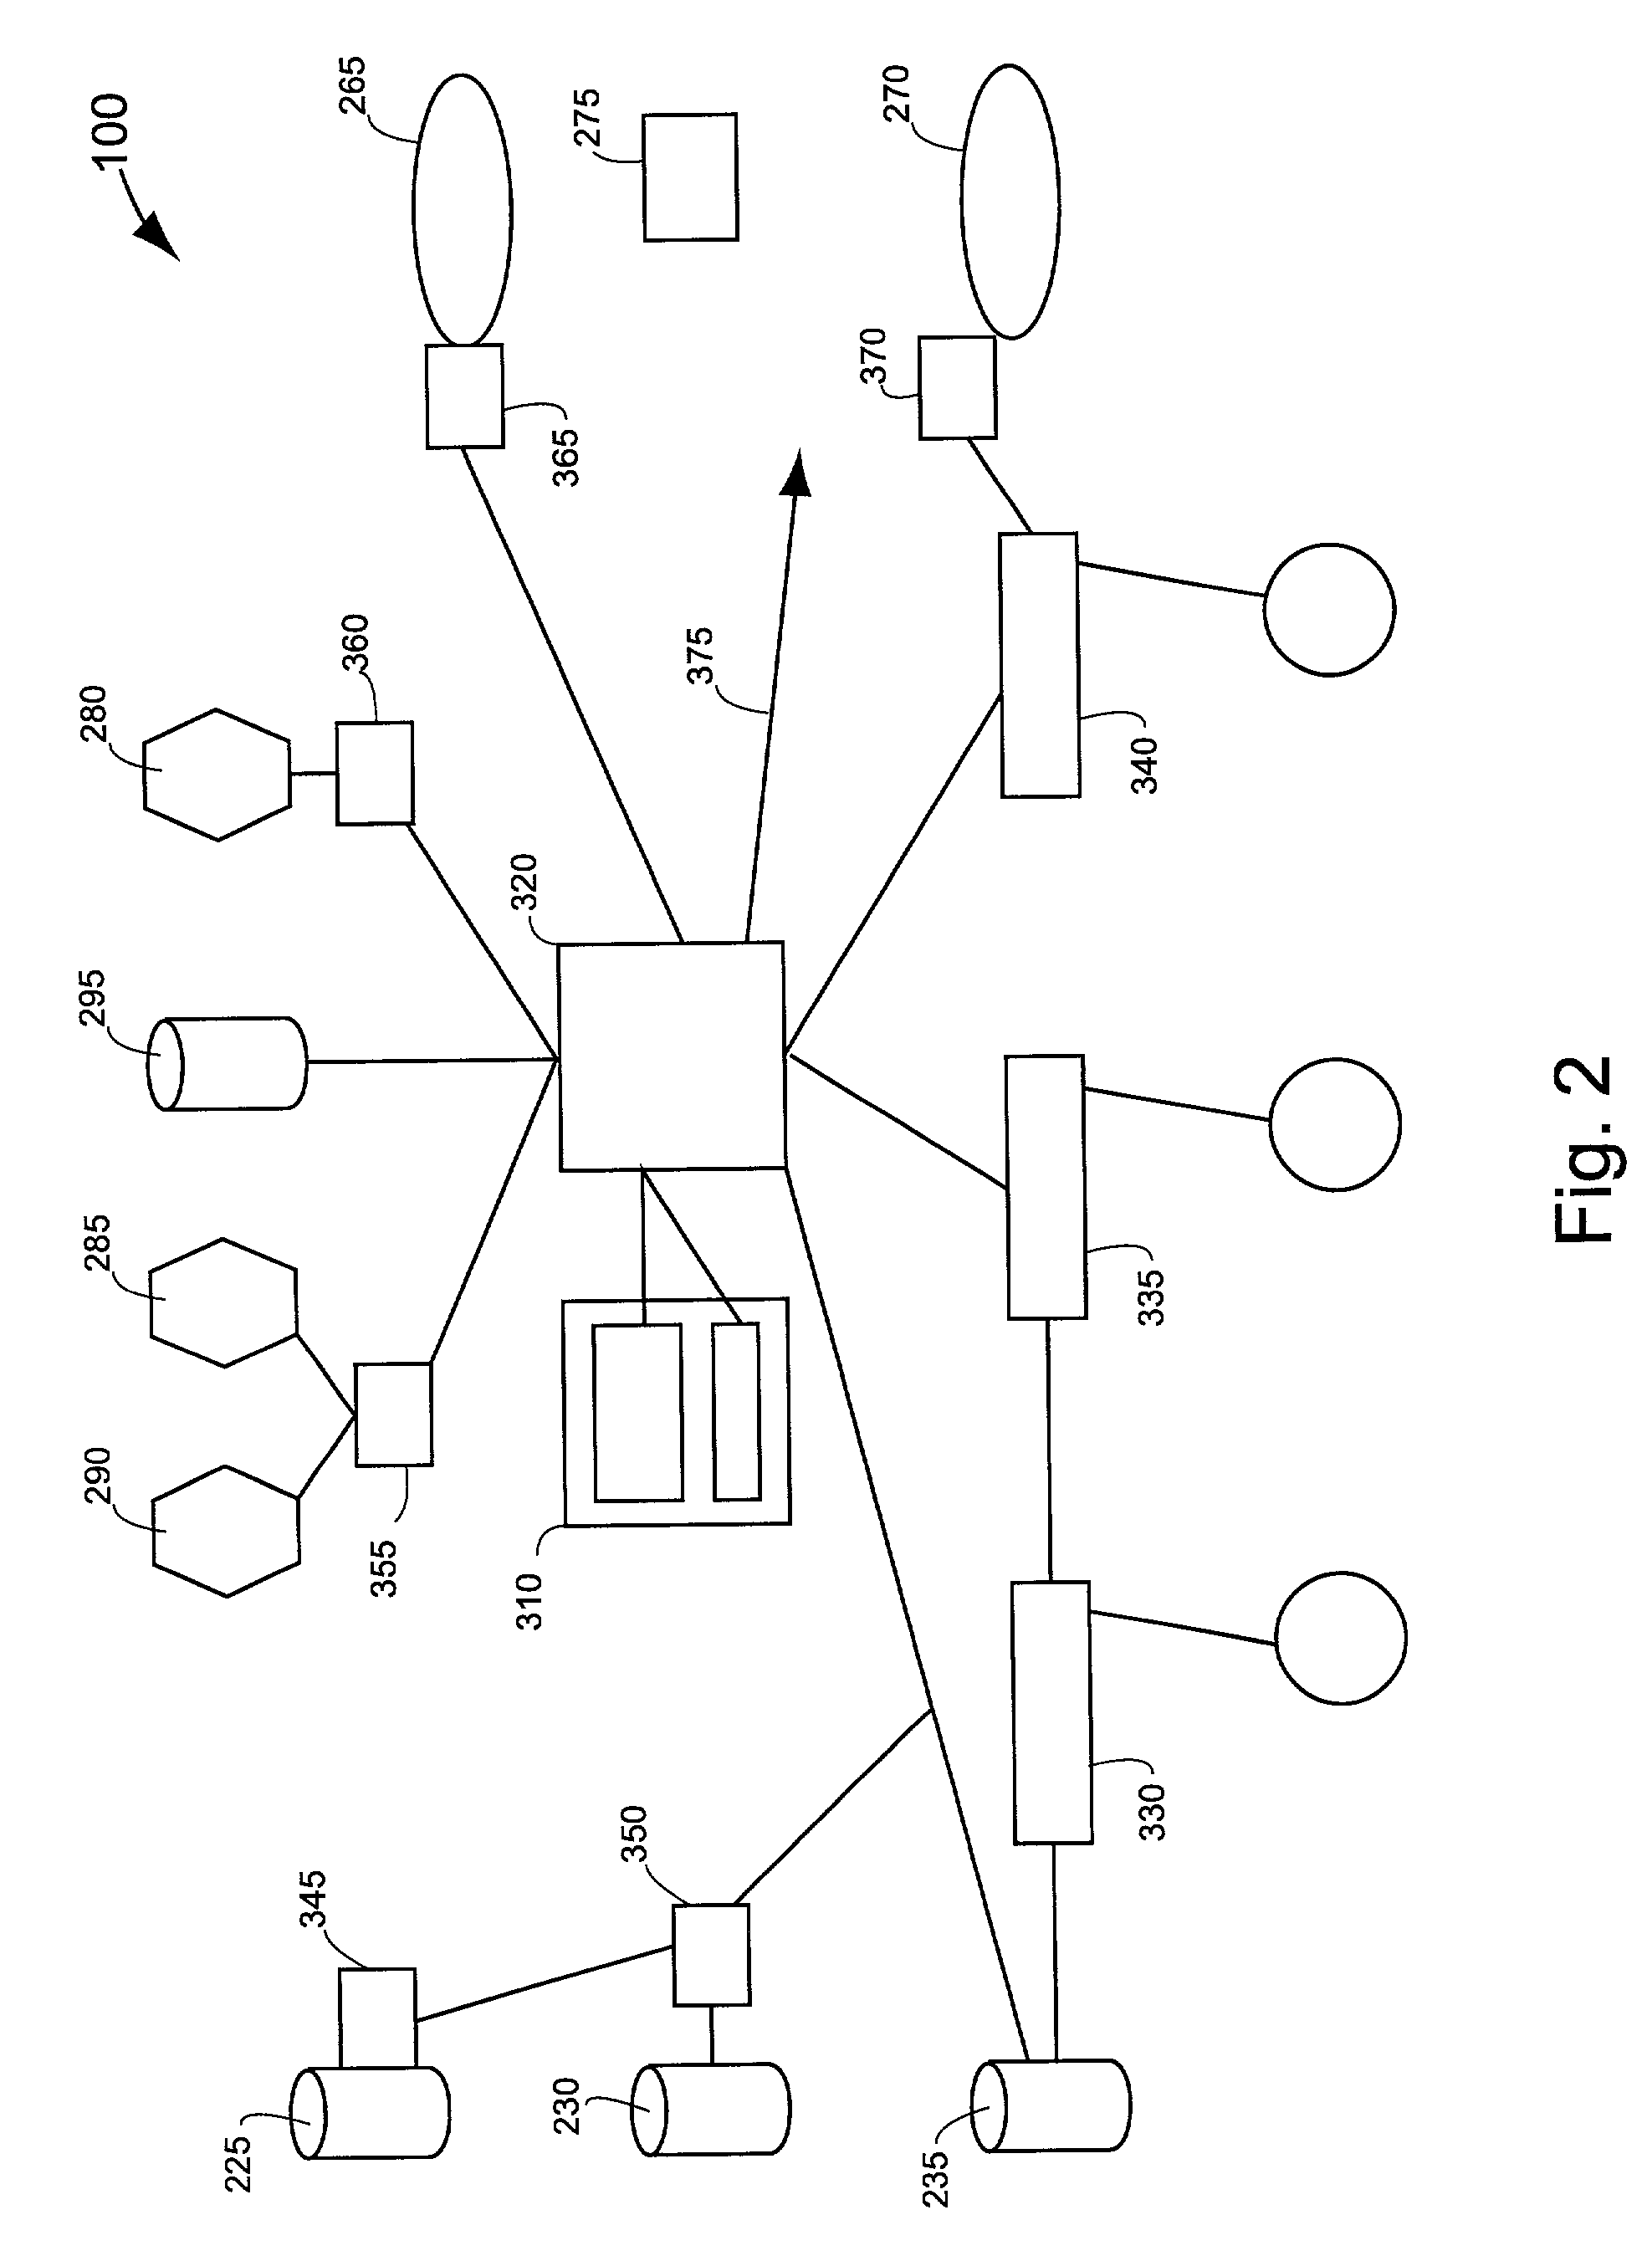 High throughput processing system and method of using